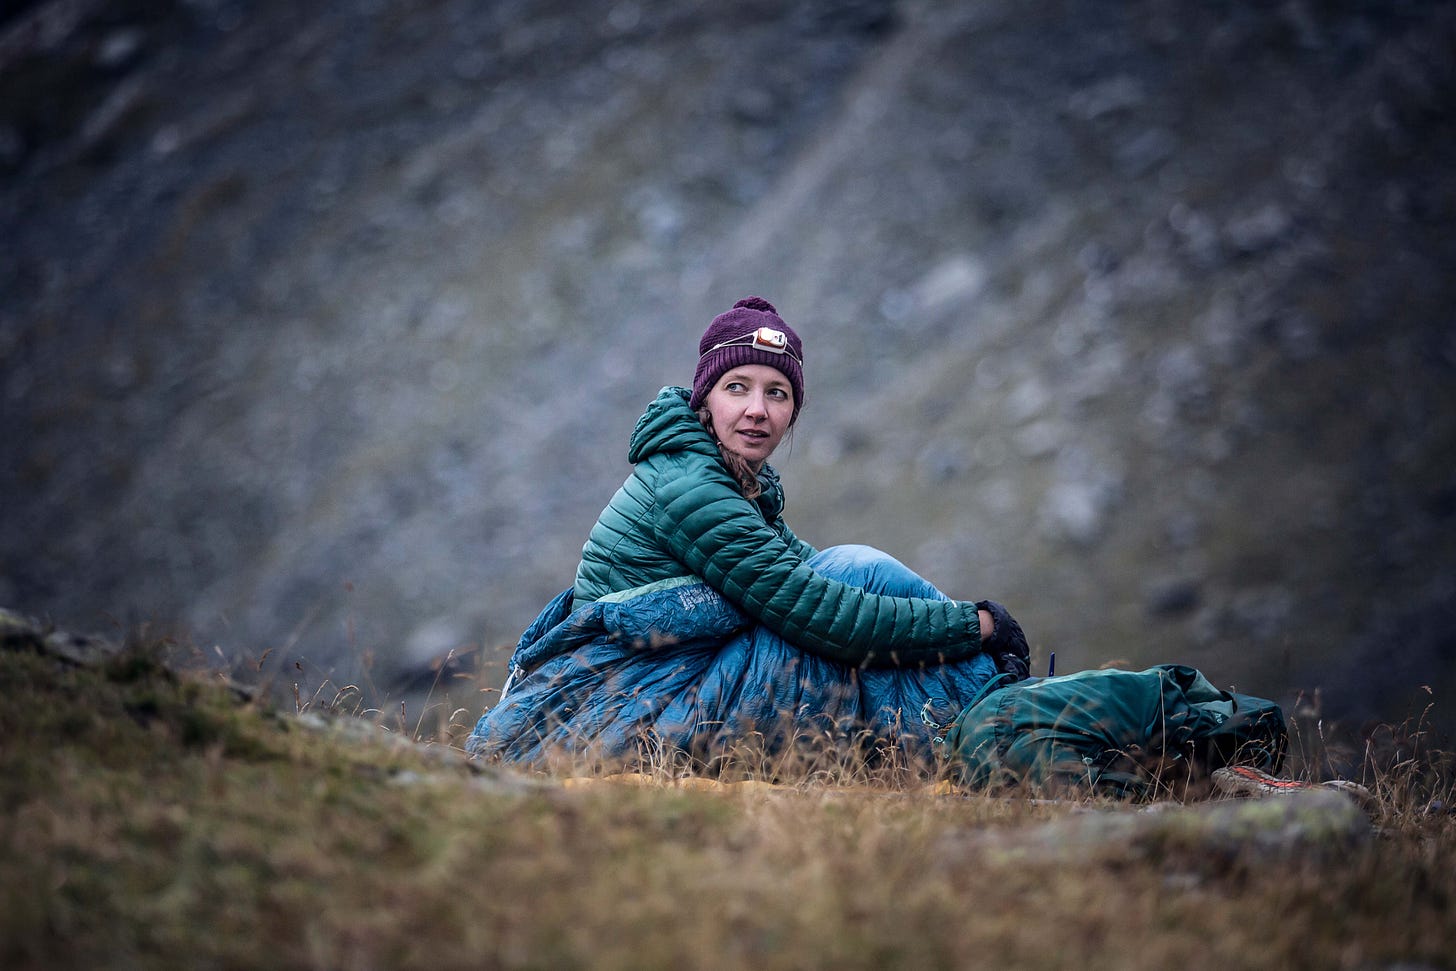 Jenny sits alone in her sleeping bag on dry brown grass, she wears a bobble hat with headtorch, down jacket and gloves